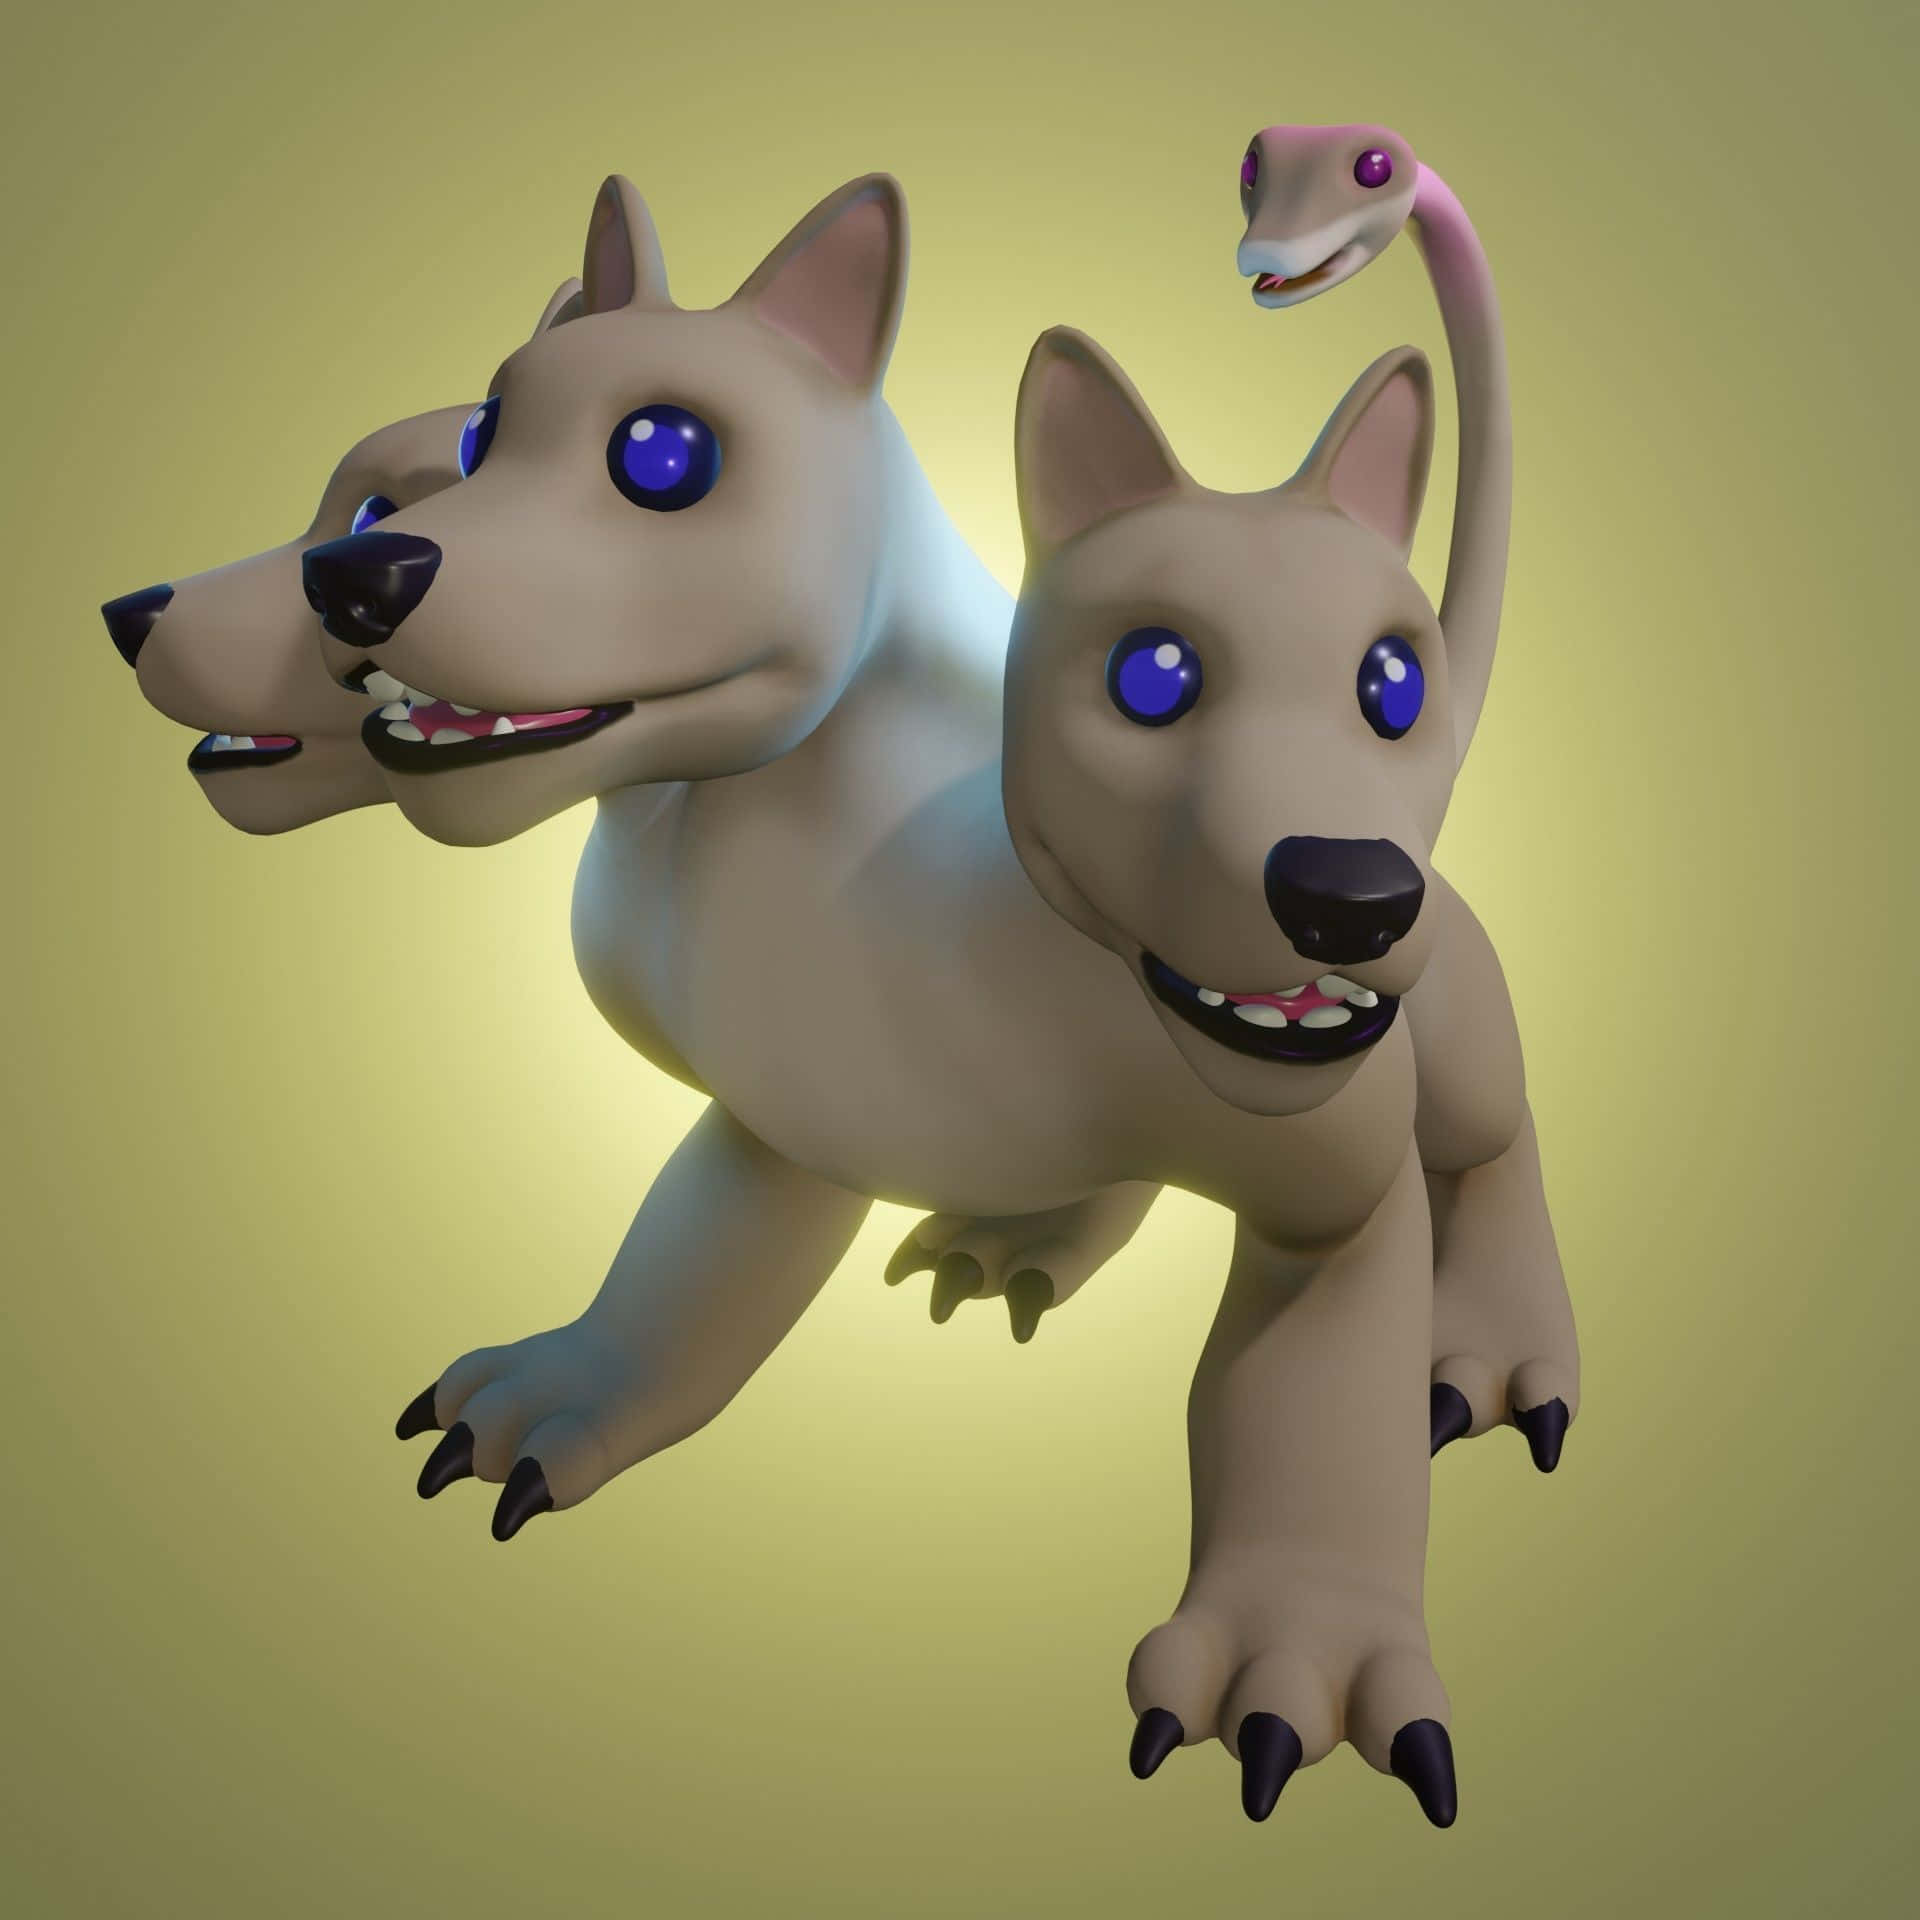 A 3d Model Of A Dog With Blue Eyes